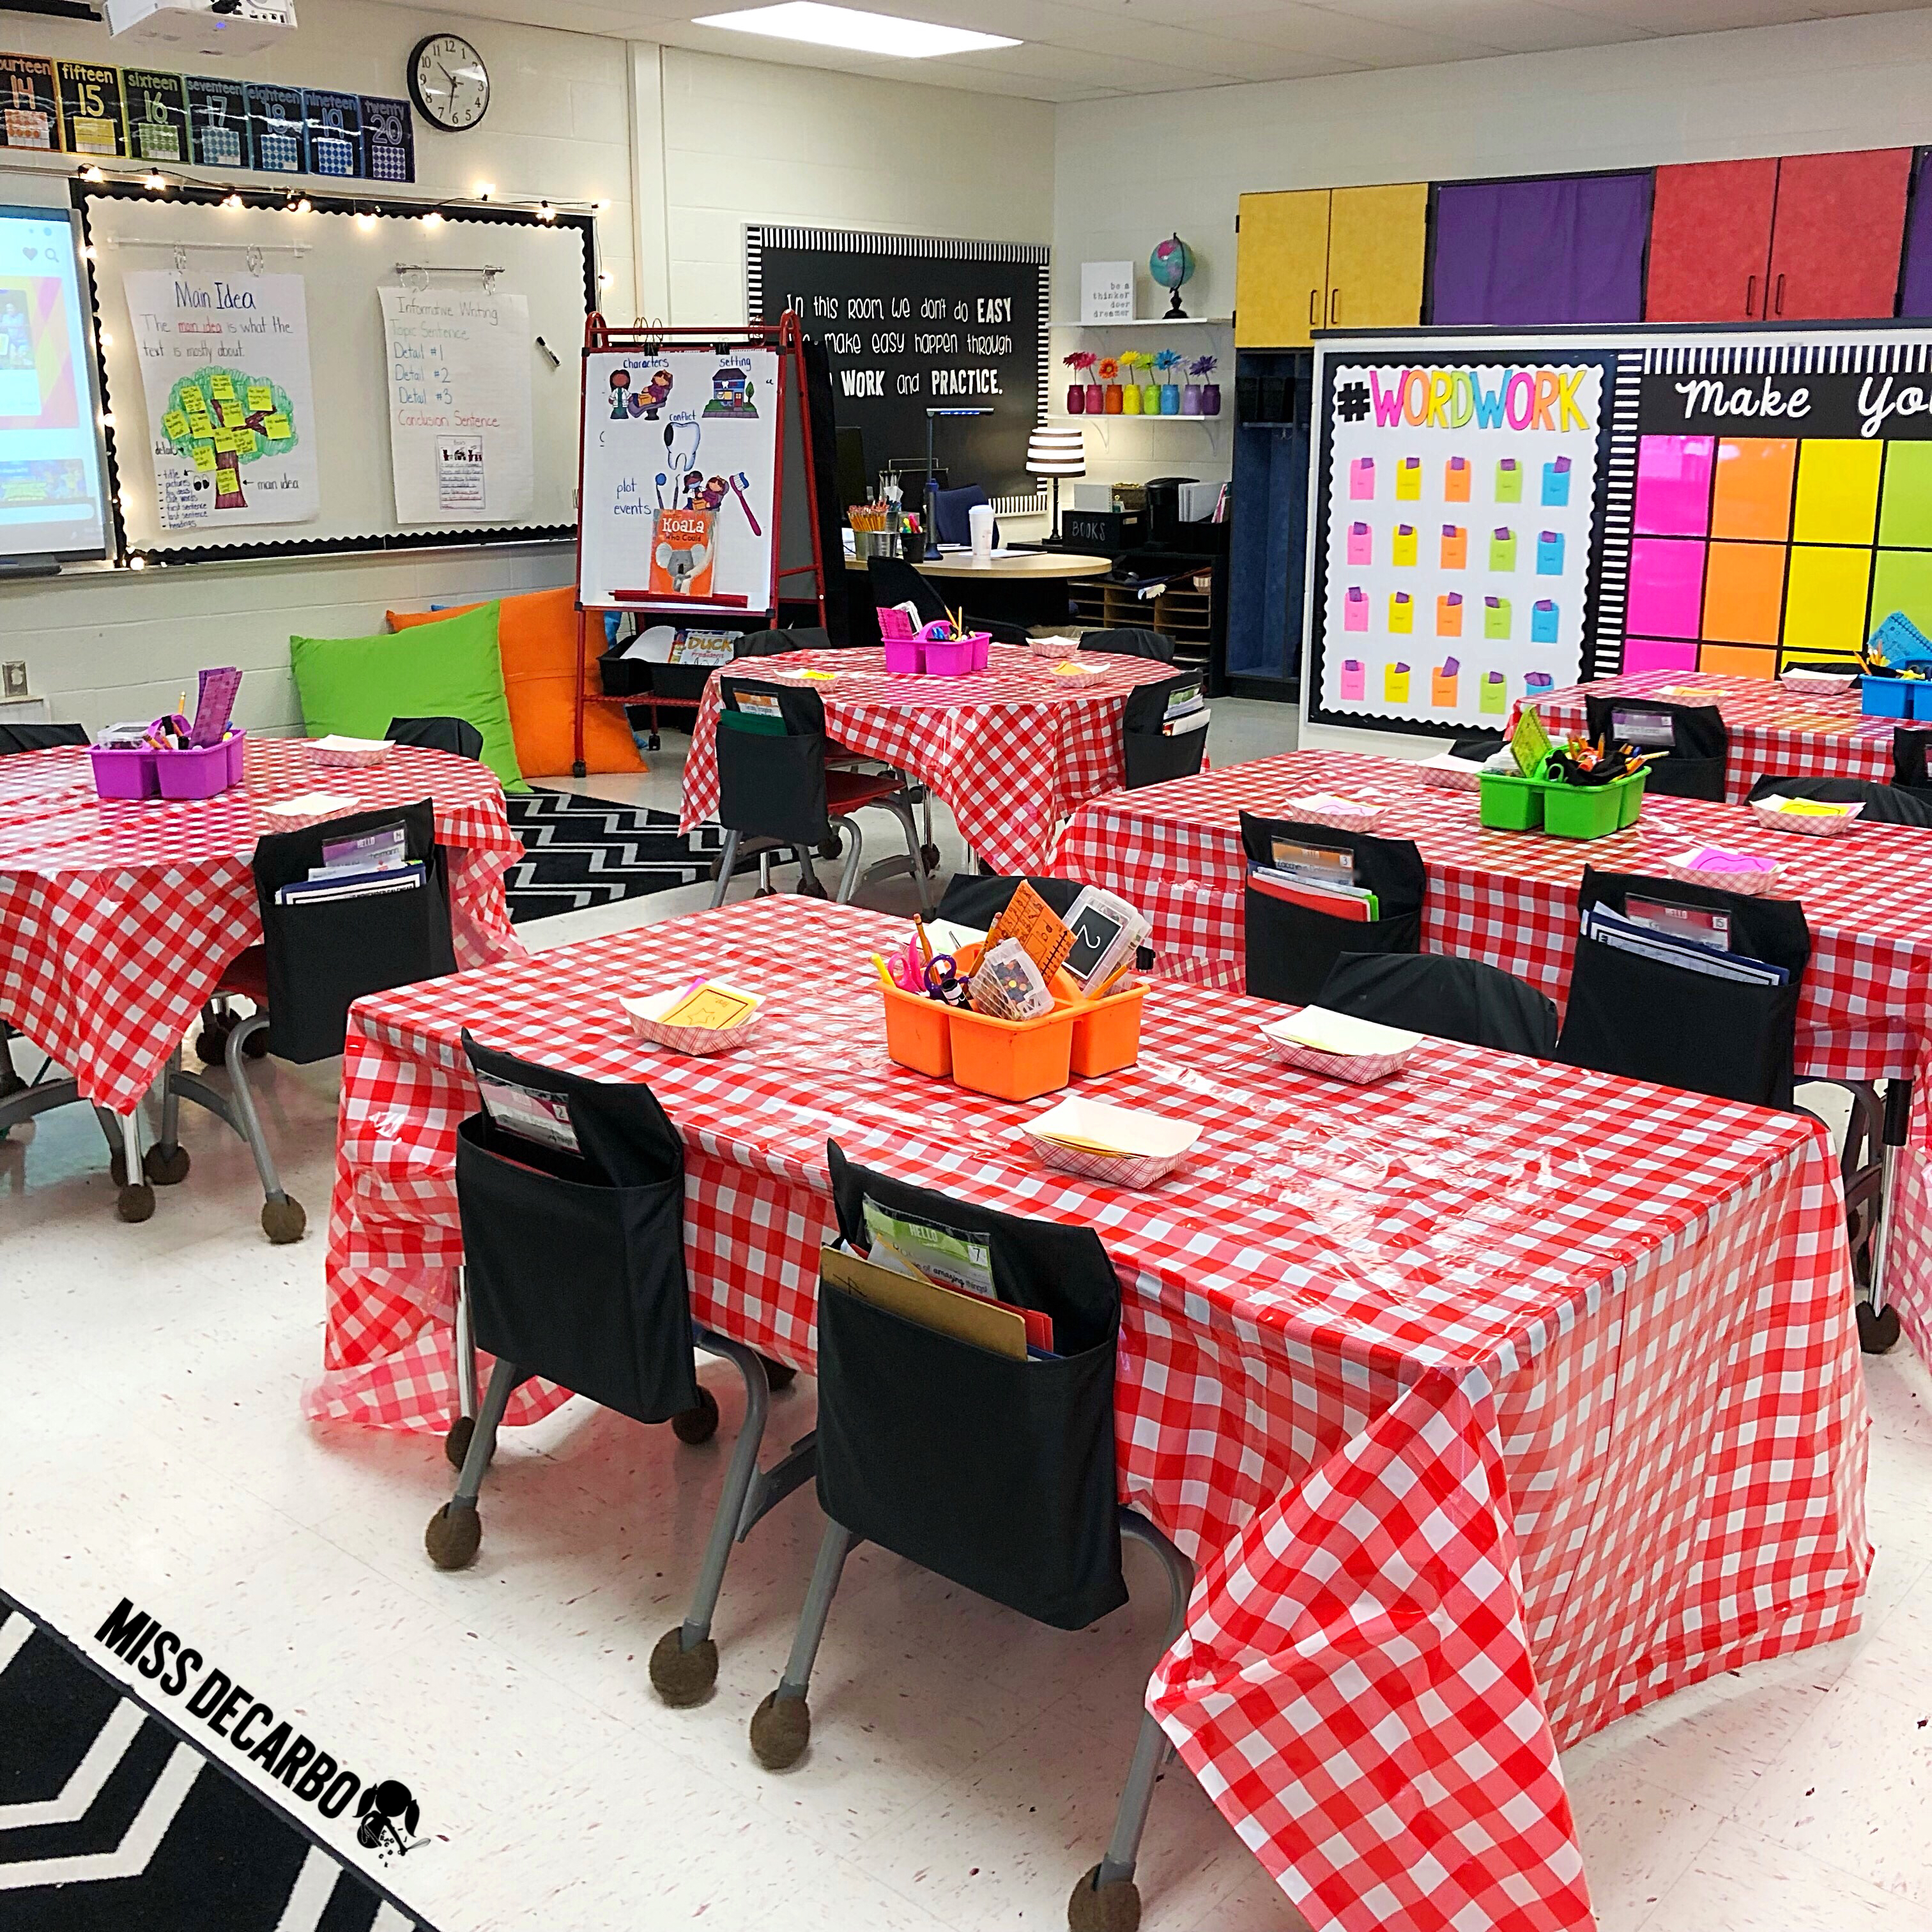 Decorate your classroom with checkered tablecloths for Restaurant Retell day! Your students will love making a retelling sandwich and using to-go boxes for their visual retelling tool!